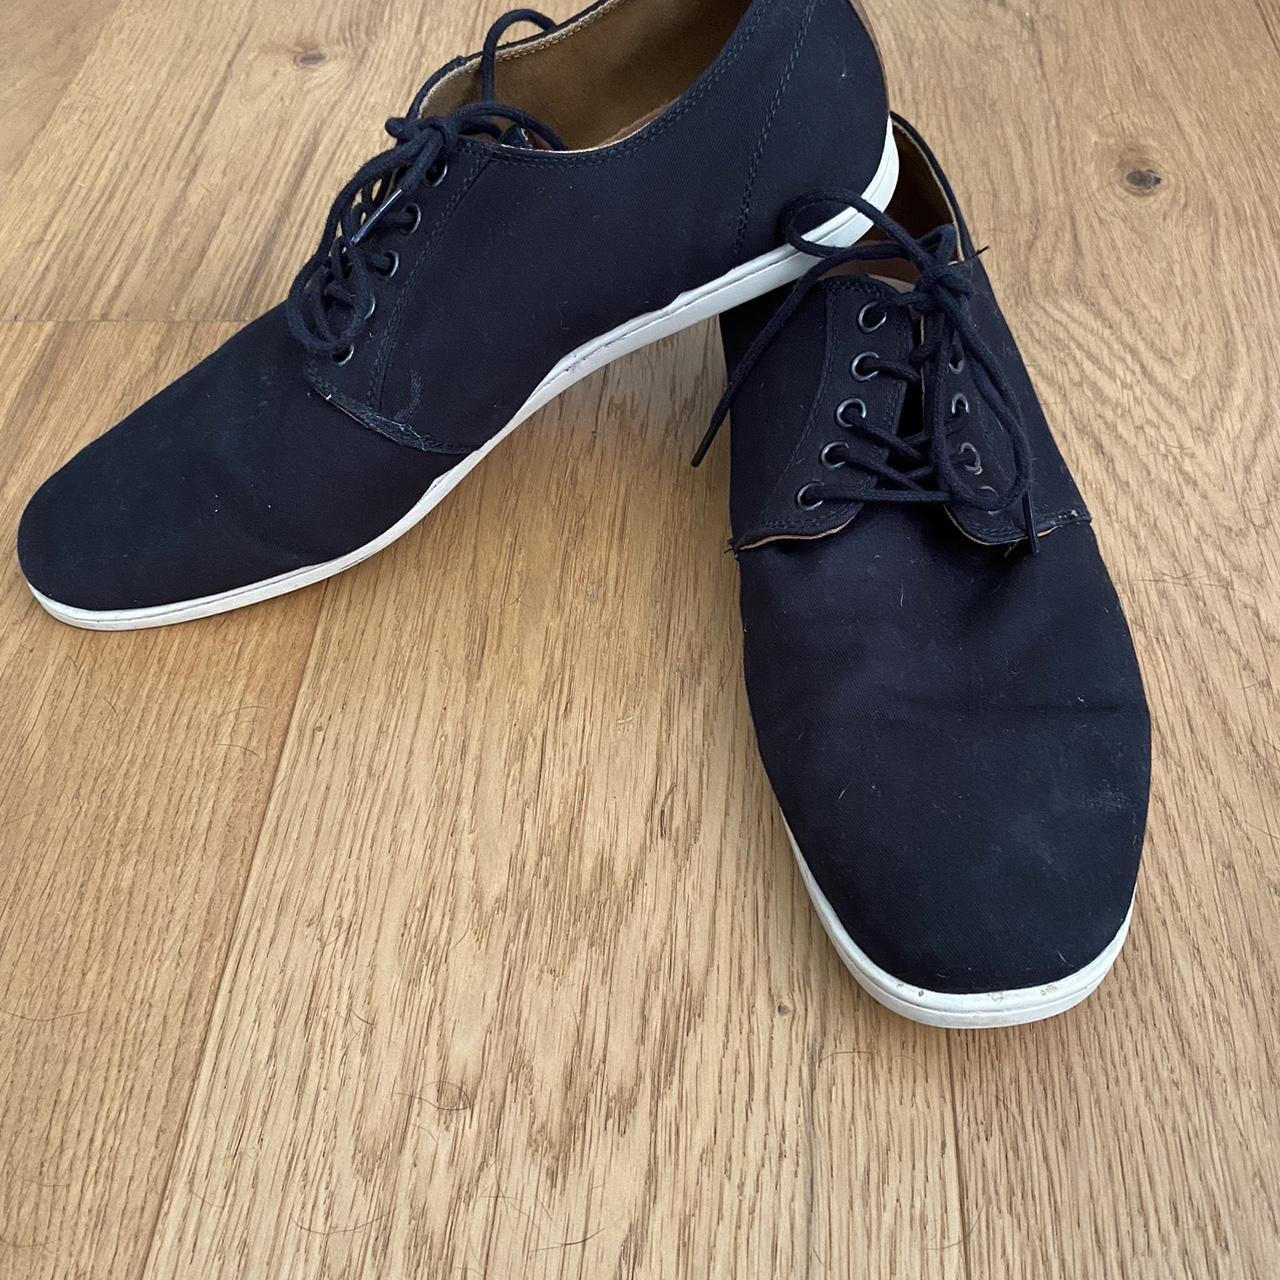 Men's Black Canvas WILD RHINO Casual Lace Up Shoes... - Depop